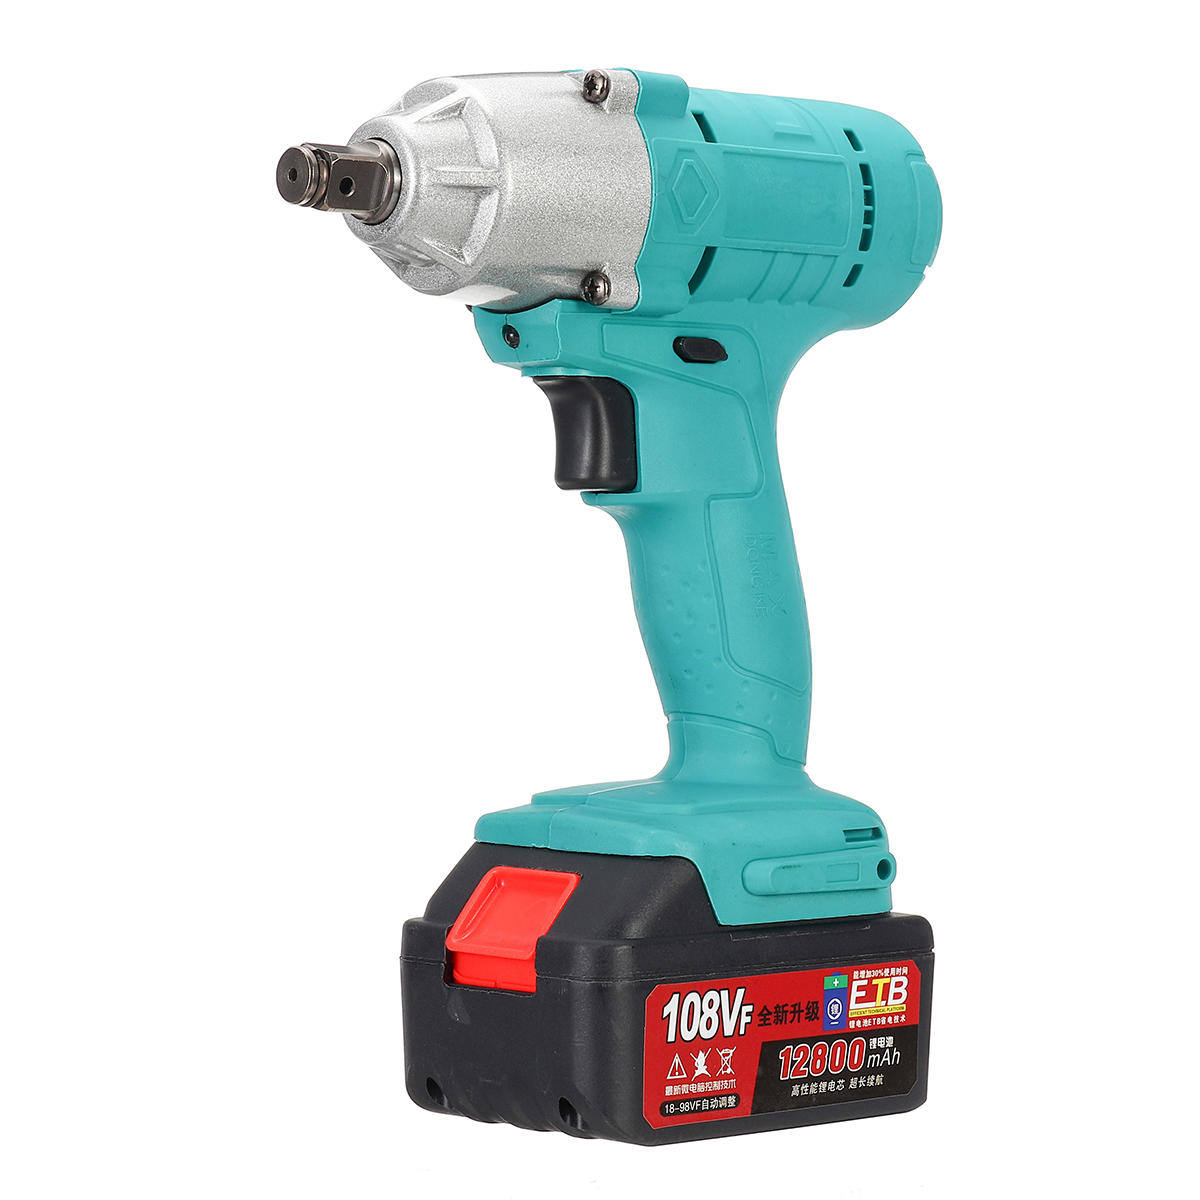 Image of 108VF 12800mAh Lithium-Ion Battery Electric Cordless Impact Wrench Drill Driver Kit